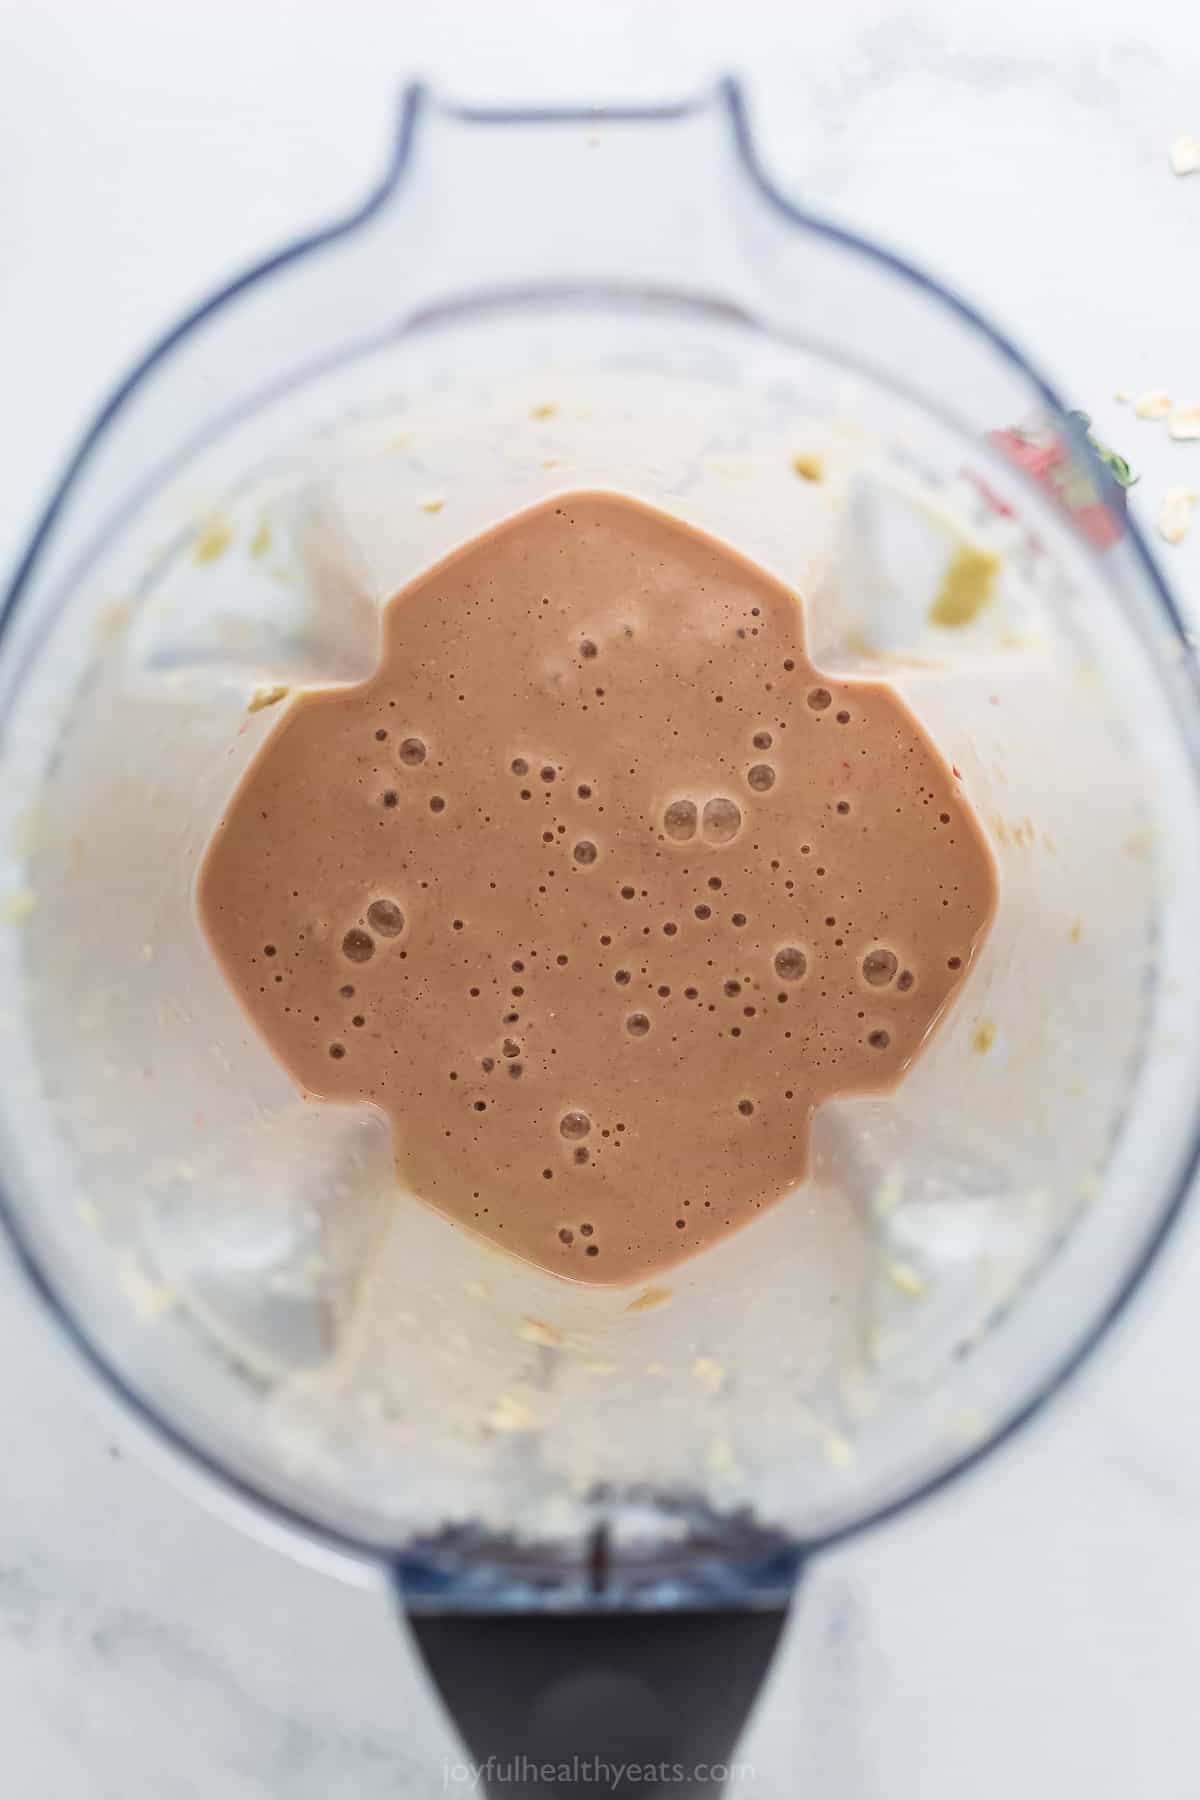 The blended smoothie ingredients inside of a large blender on top of a marble counter